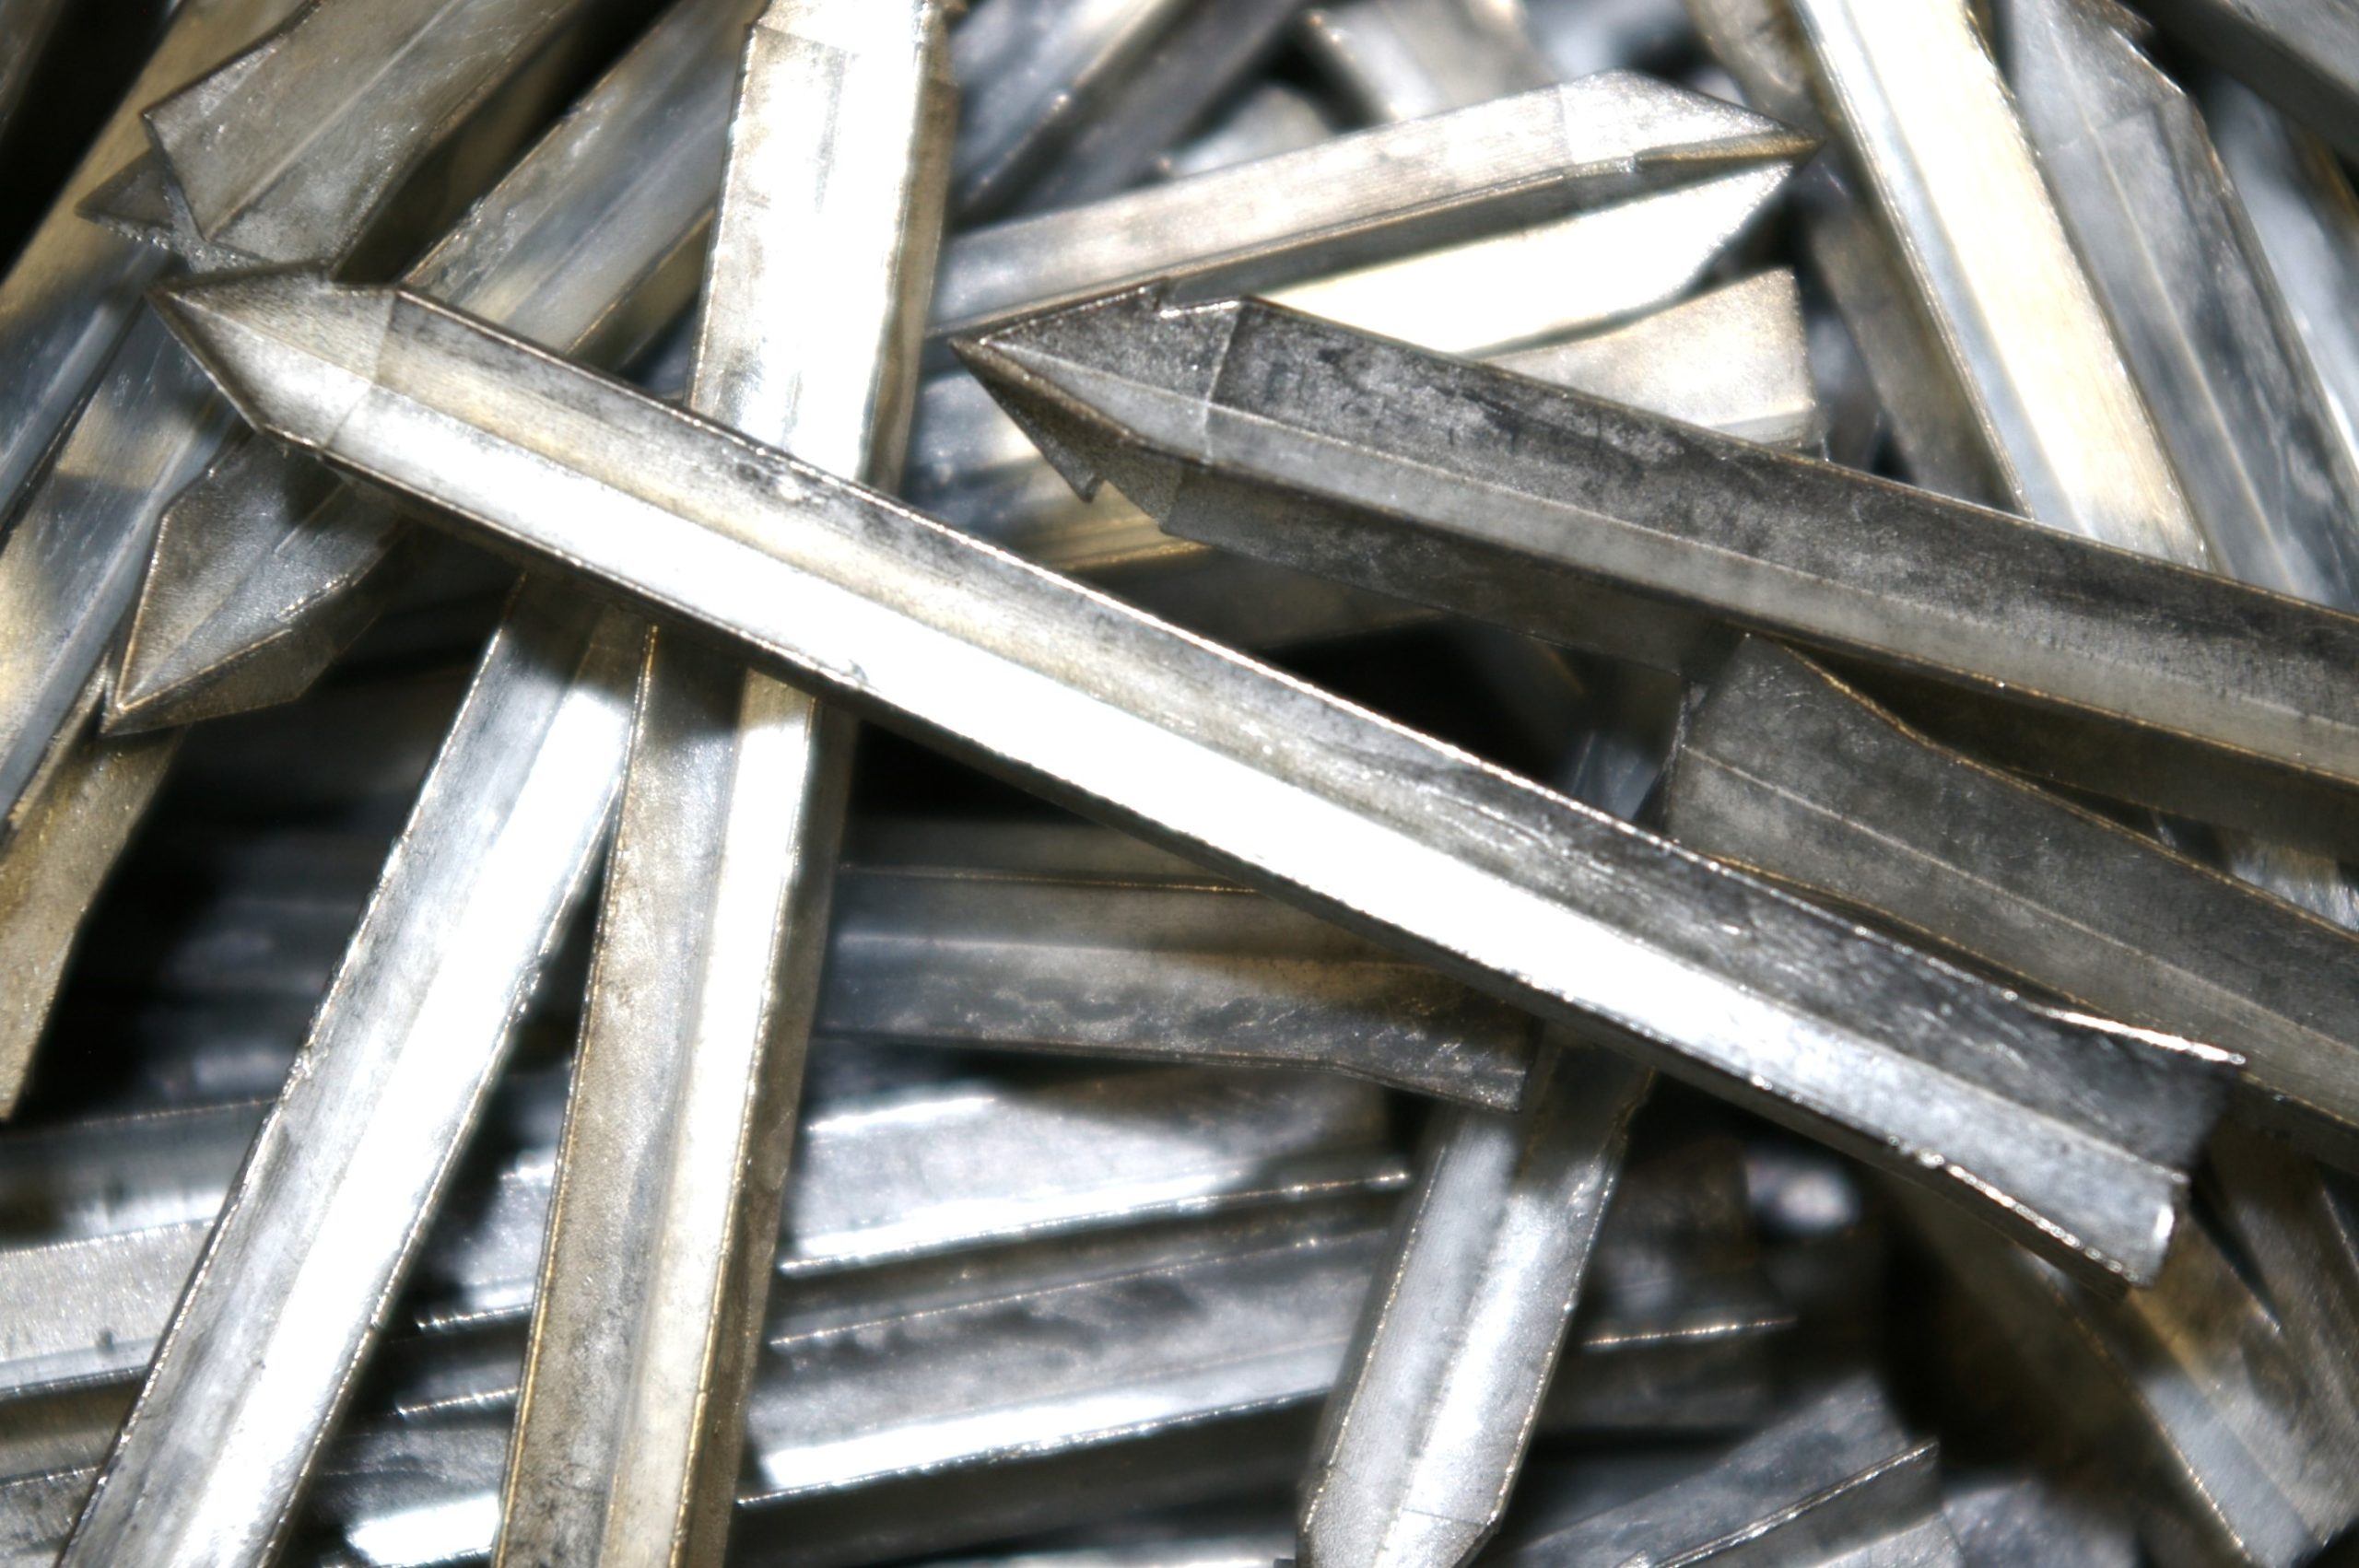 A pile of metal nails in a pile.